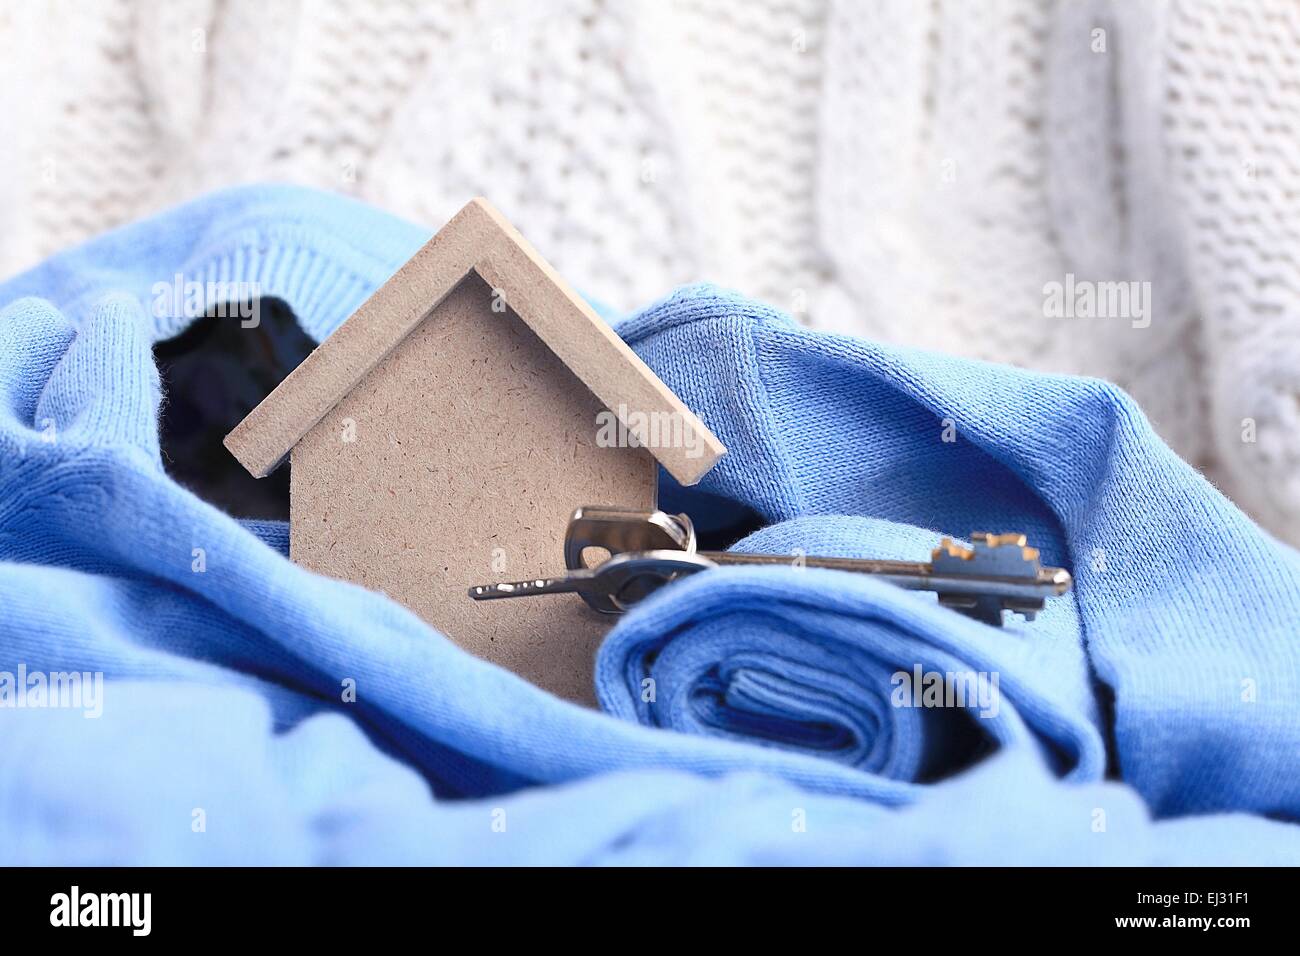 wooden toy house - home purchase mortgage concept Stock Photo